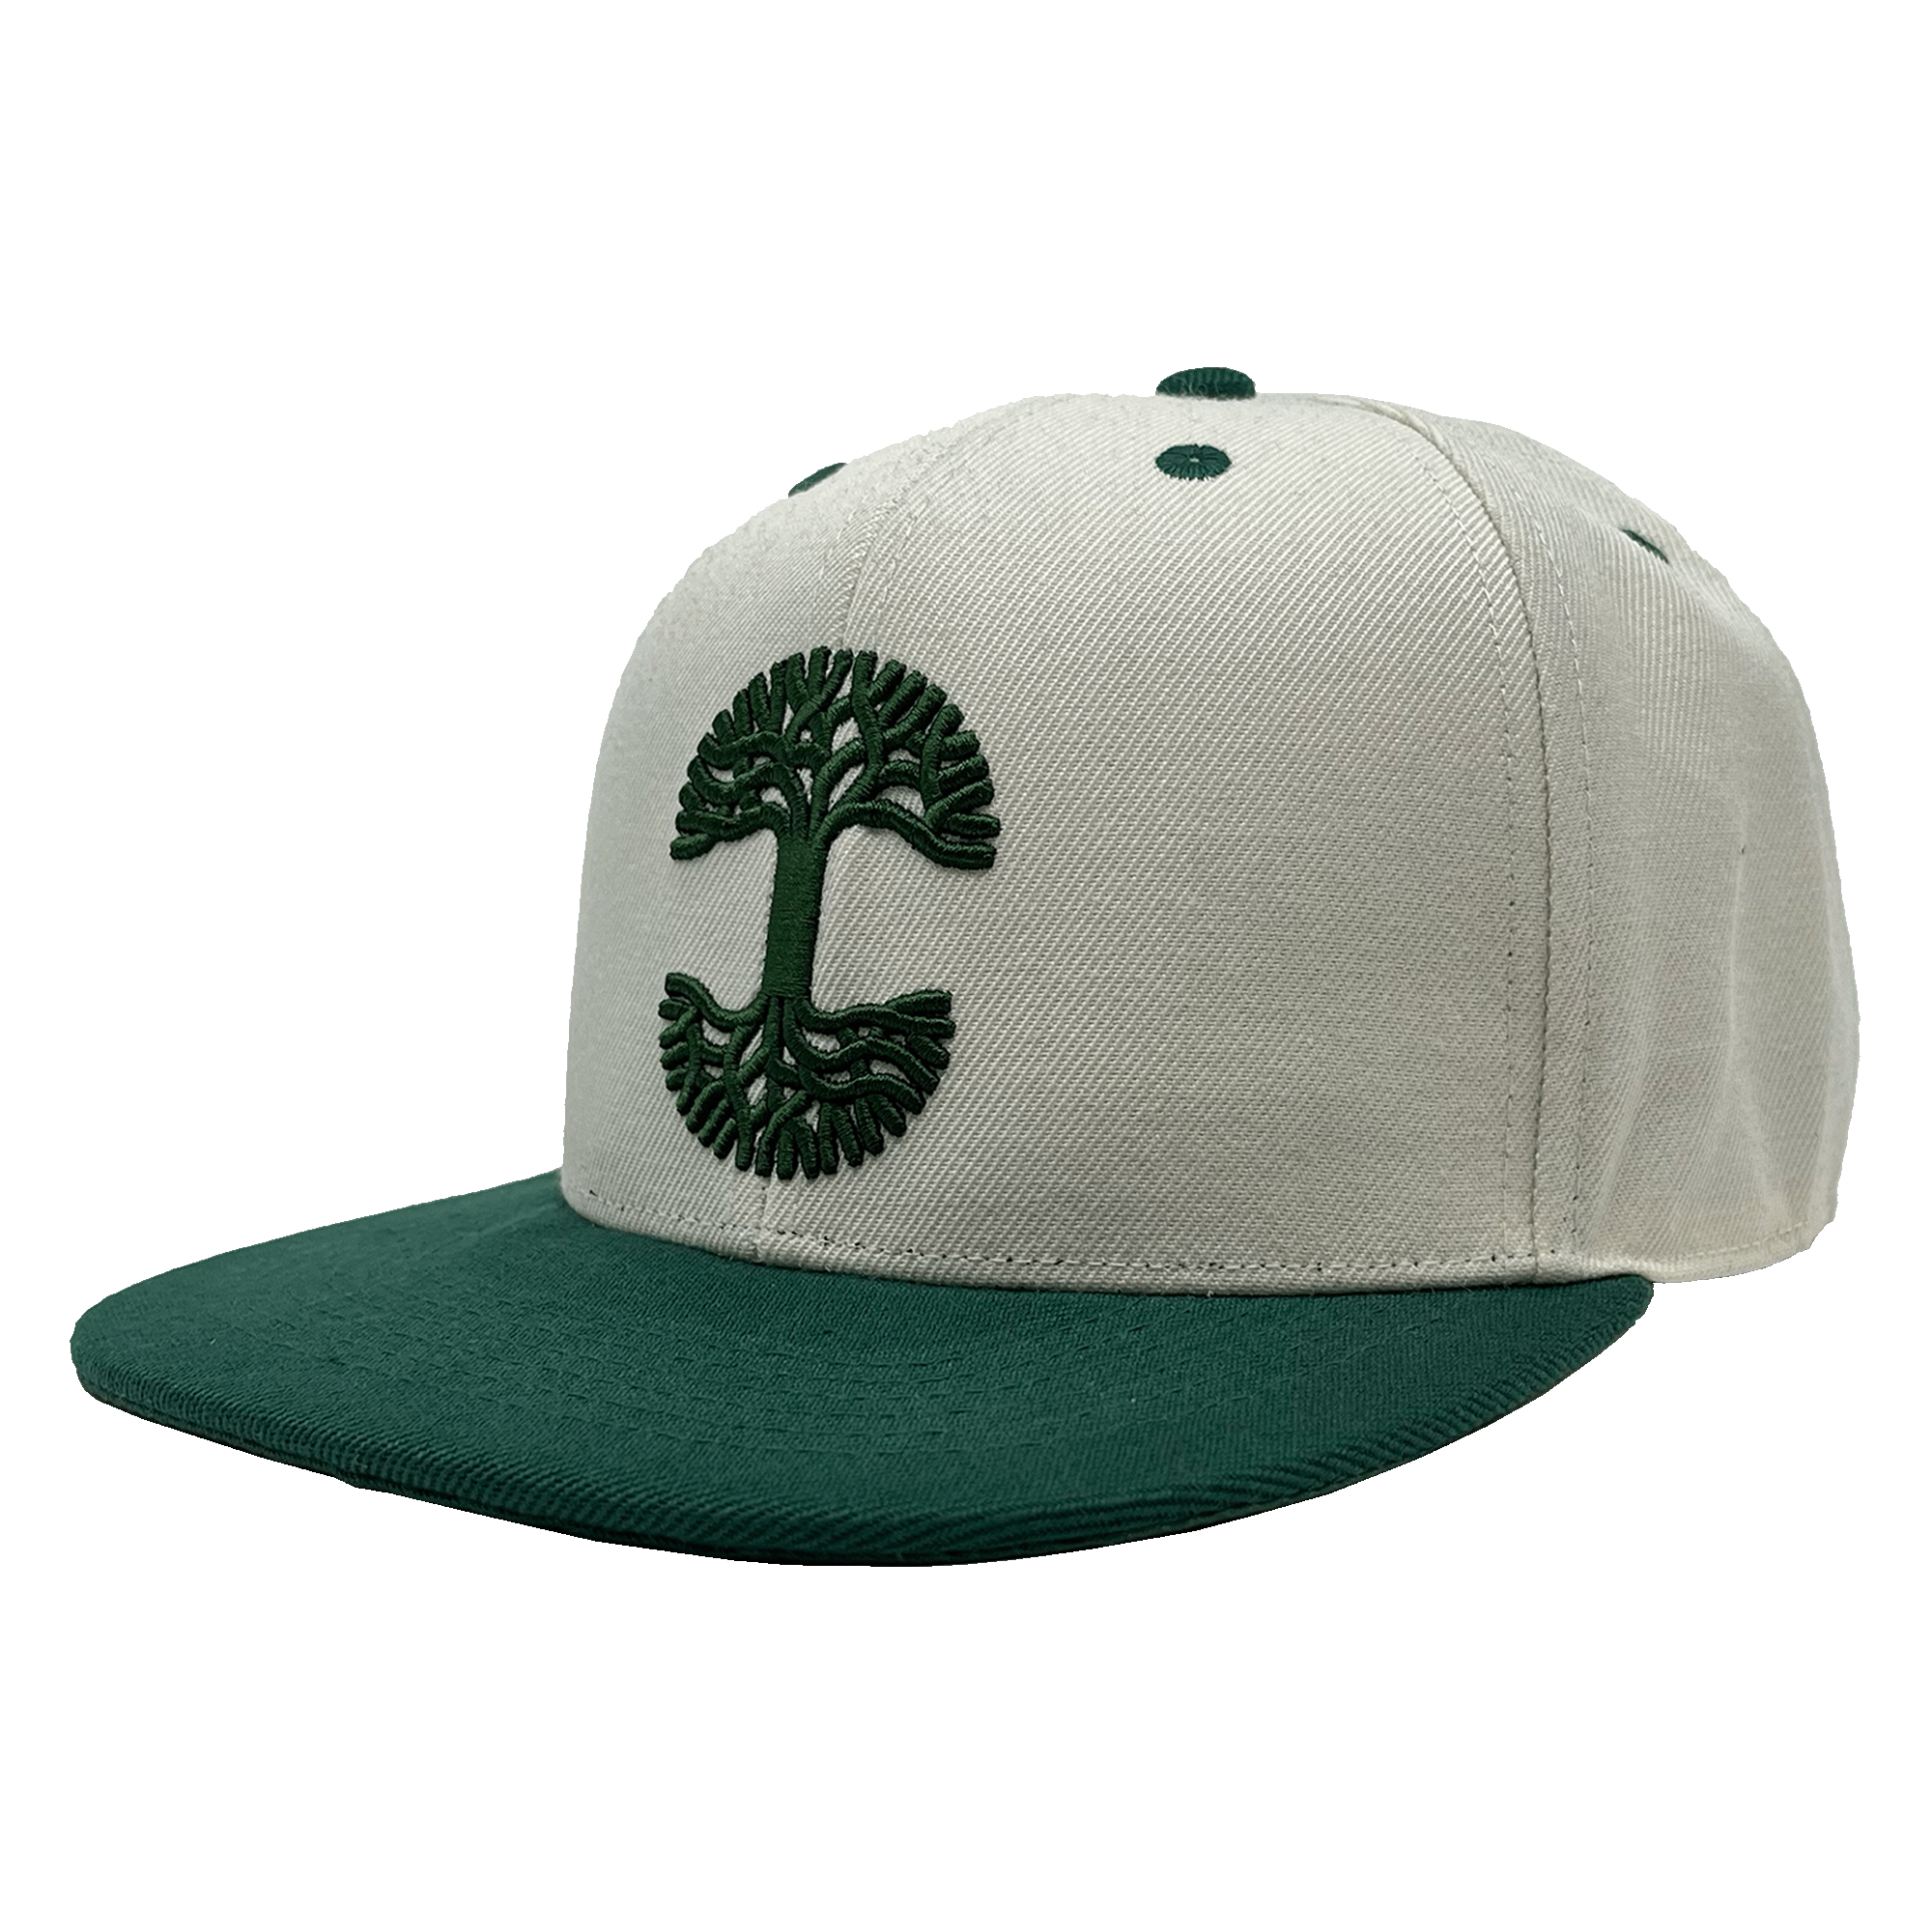 Hat - Embroidered Green Oaklandish Logo, White Crown, Snapback